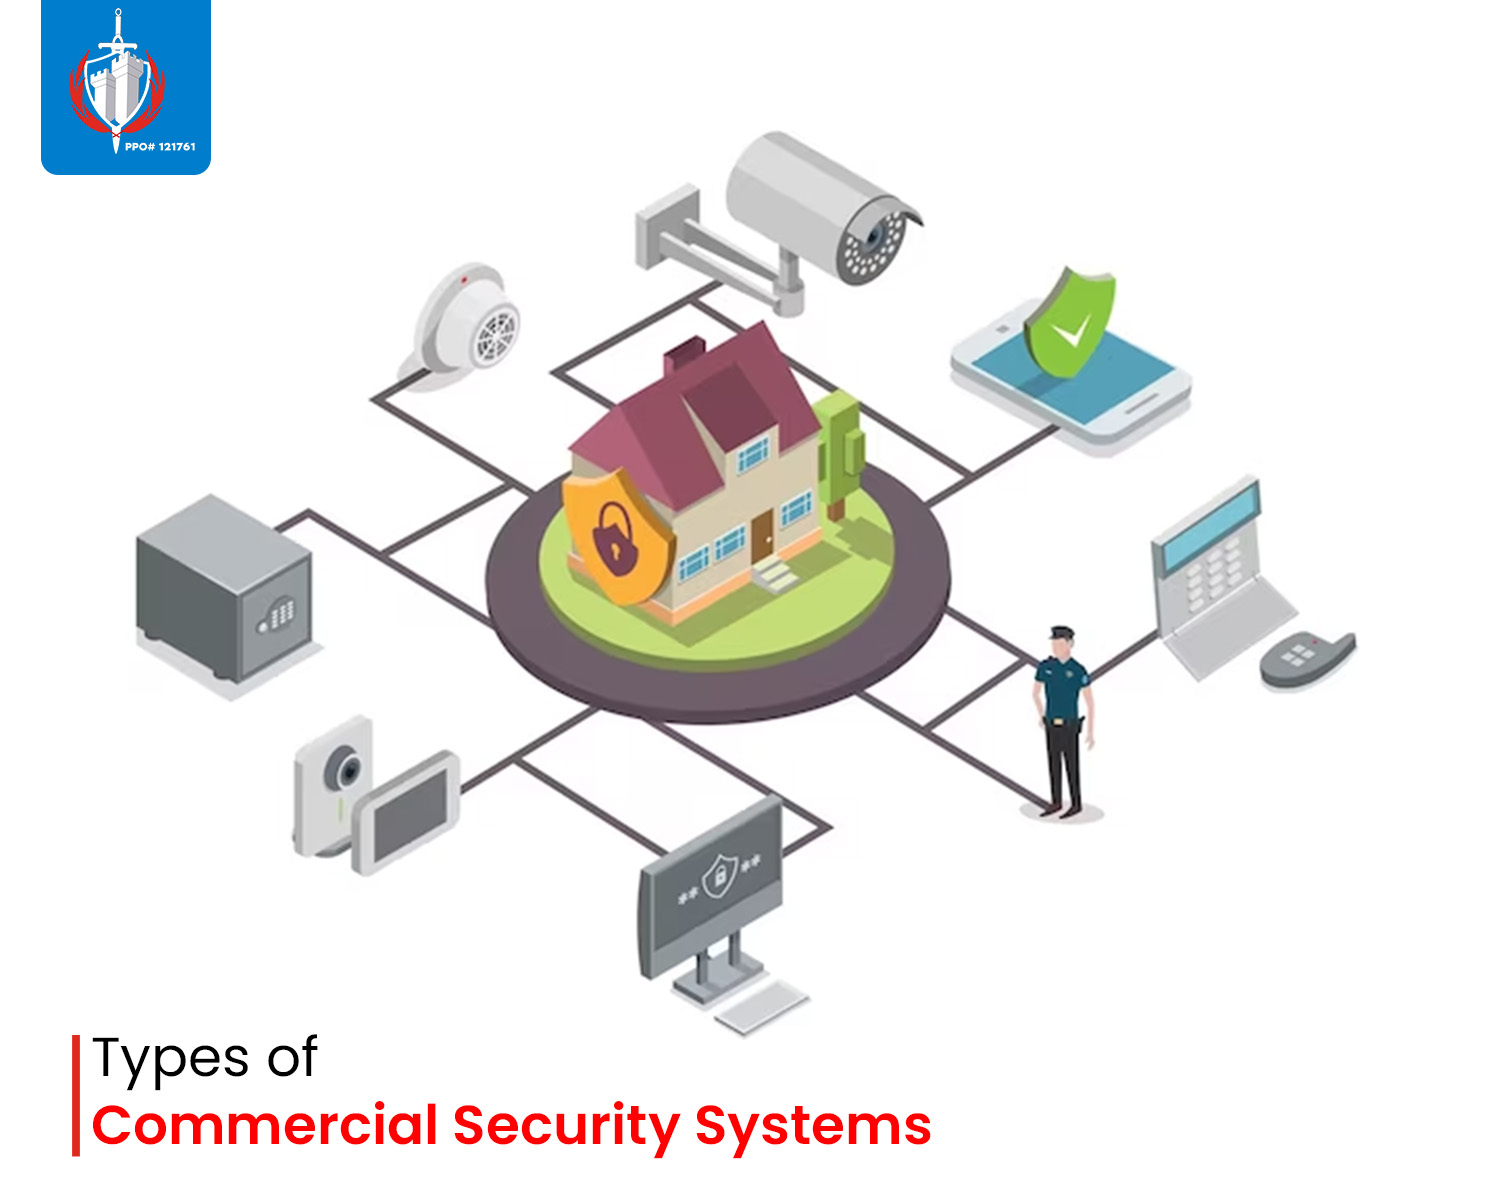 Types of Commercial Security Systems